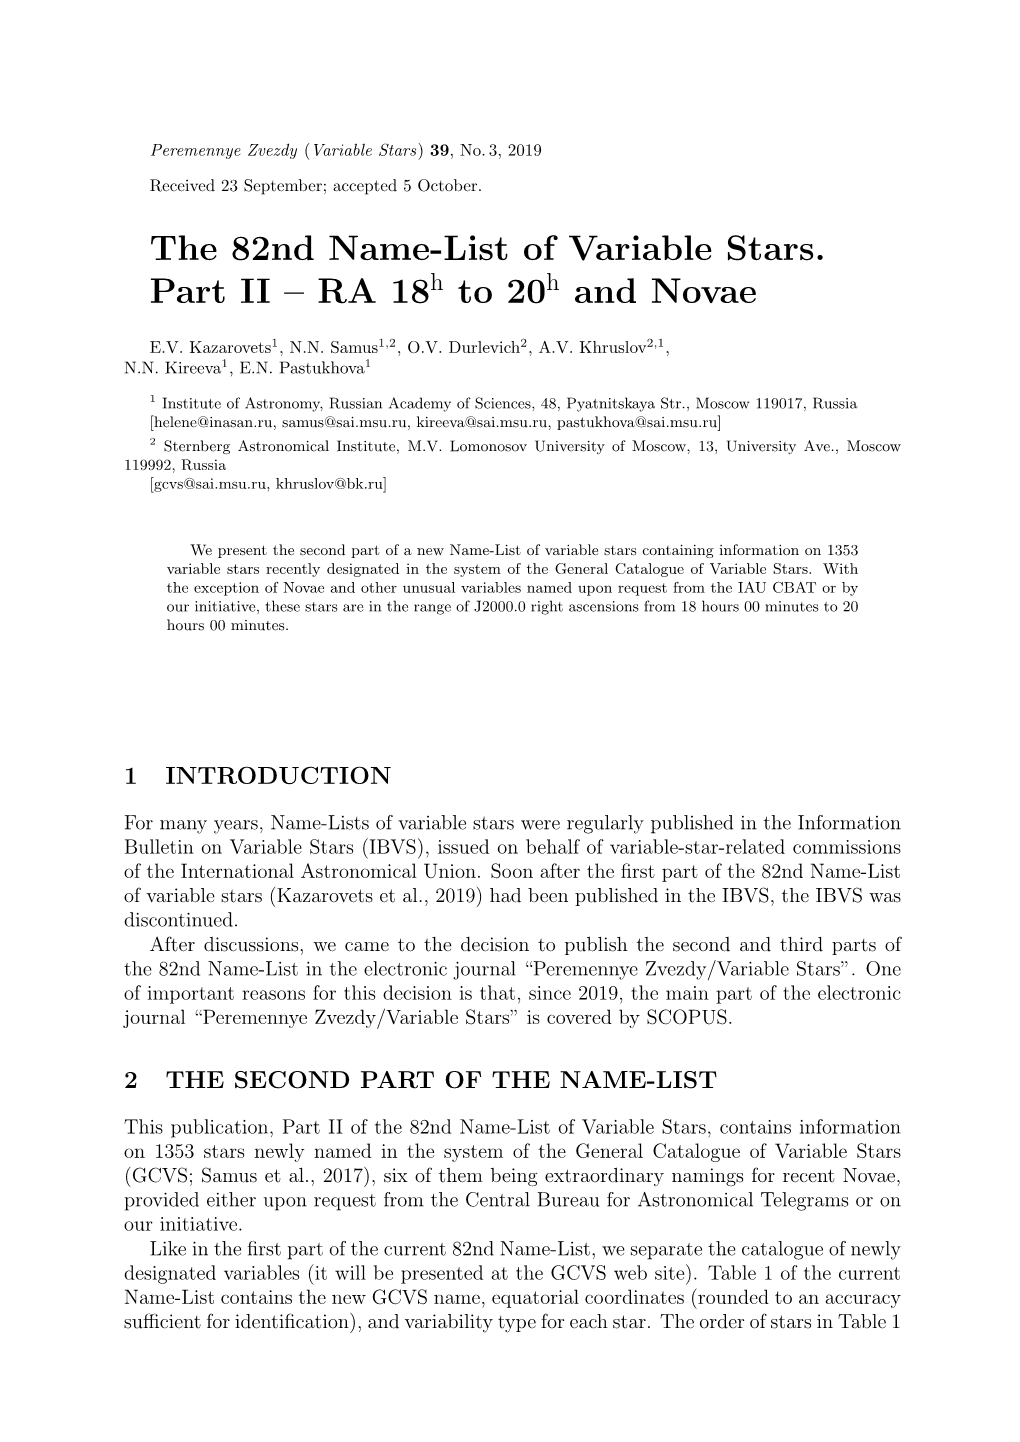 The 82Nd Name-List of Variable Stars. Part II – RA 18 to 20 and Novae